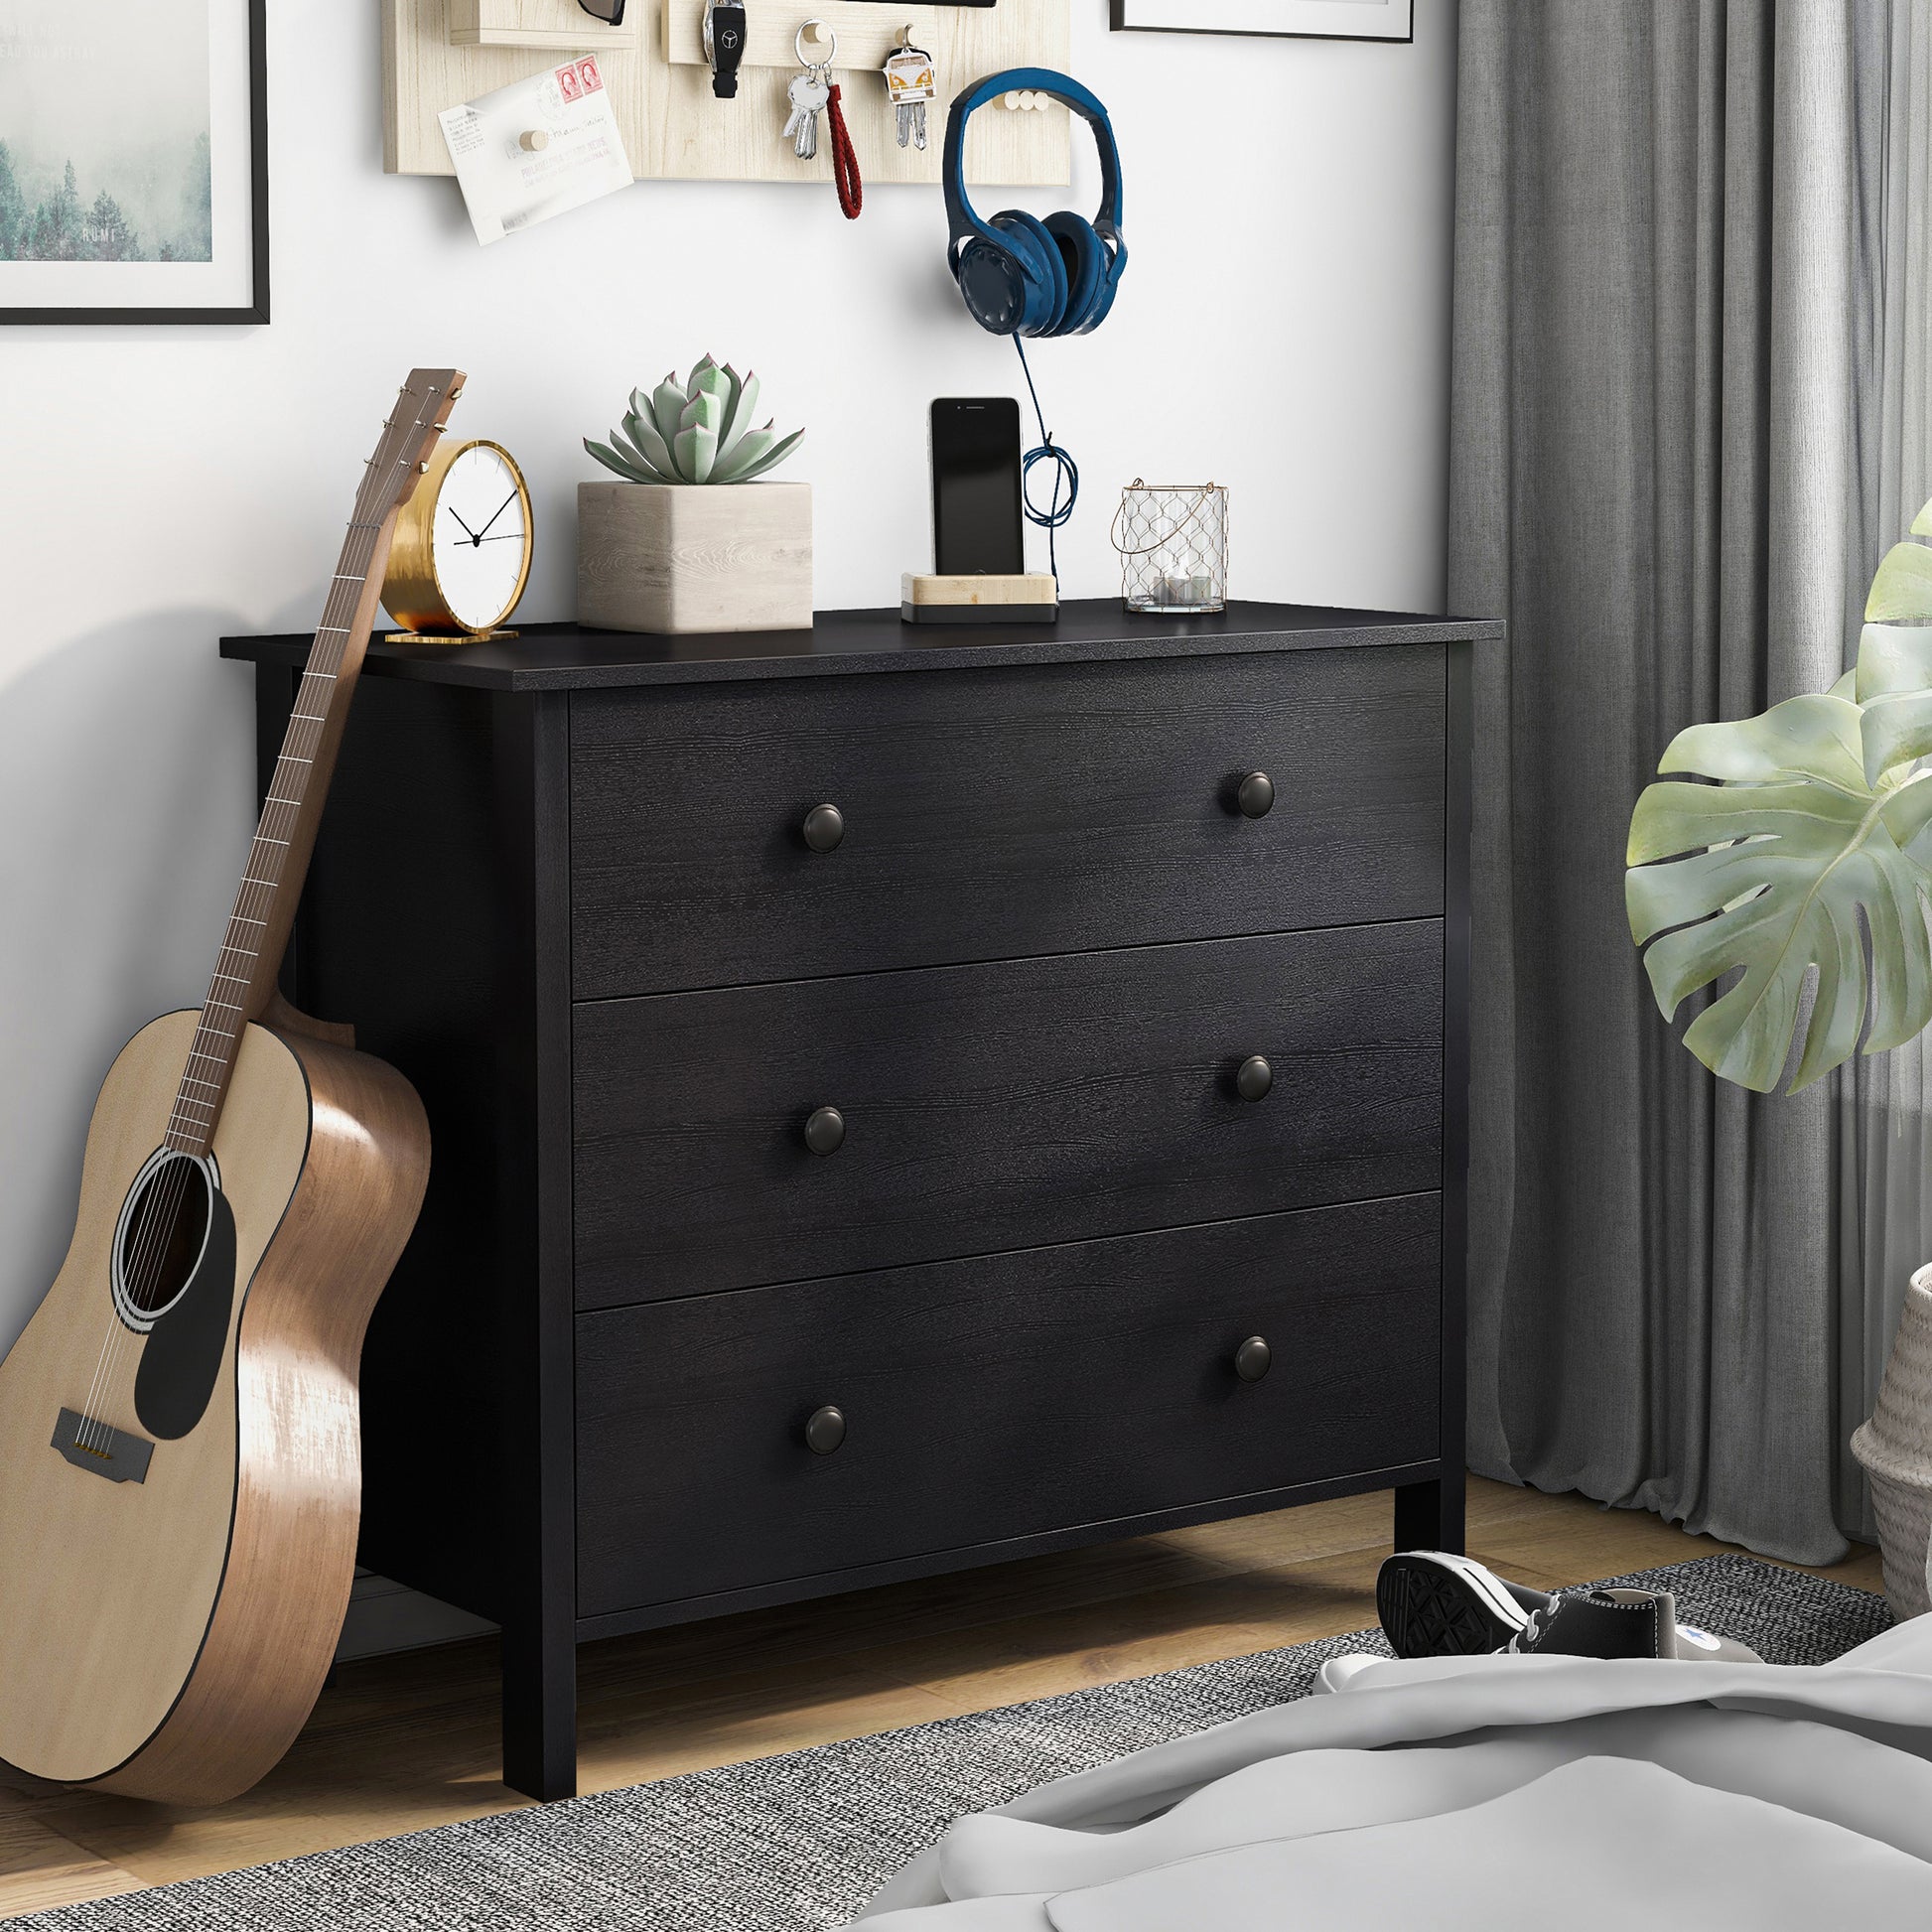 Right angled transitional black three-drawer youth dresser in a bedroom with accessories